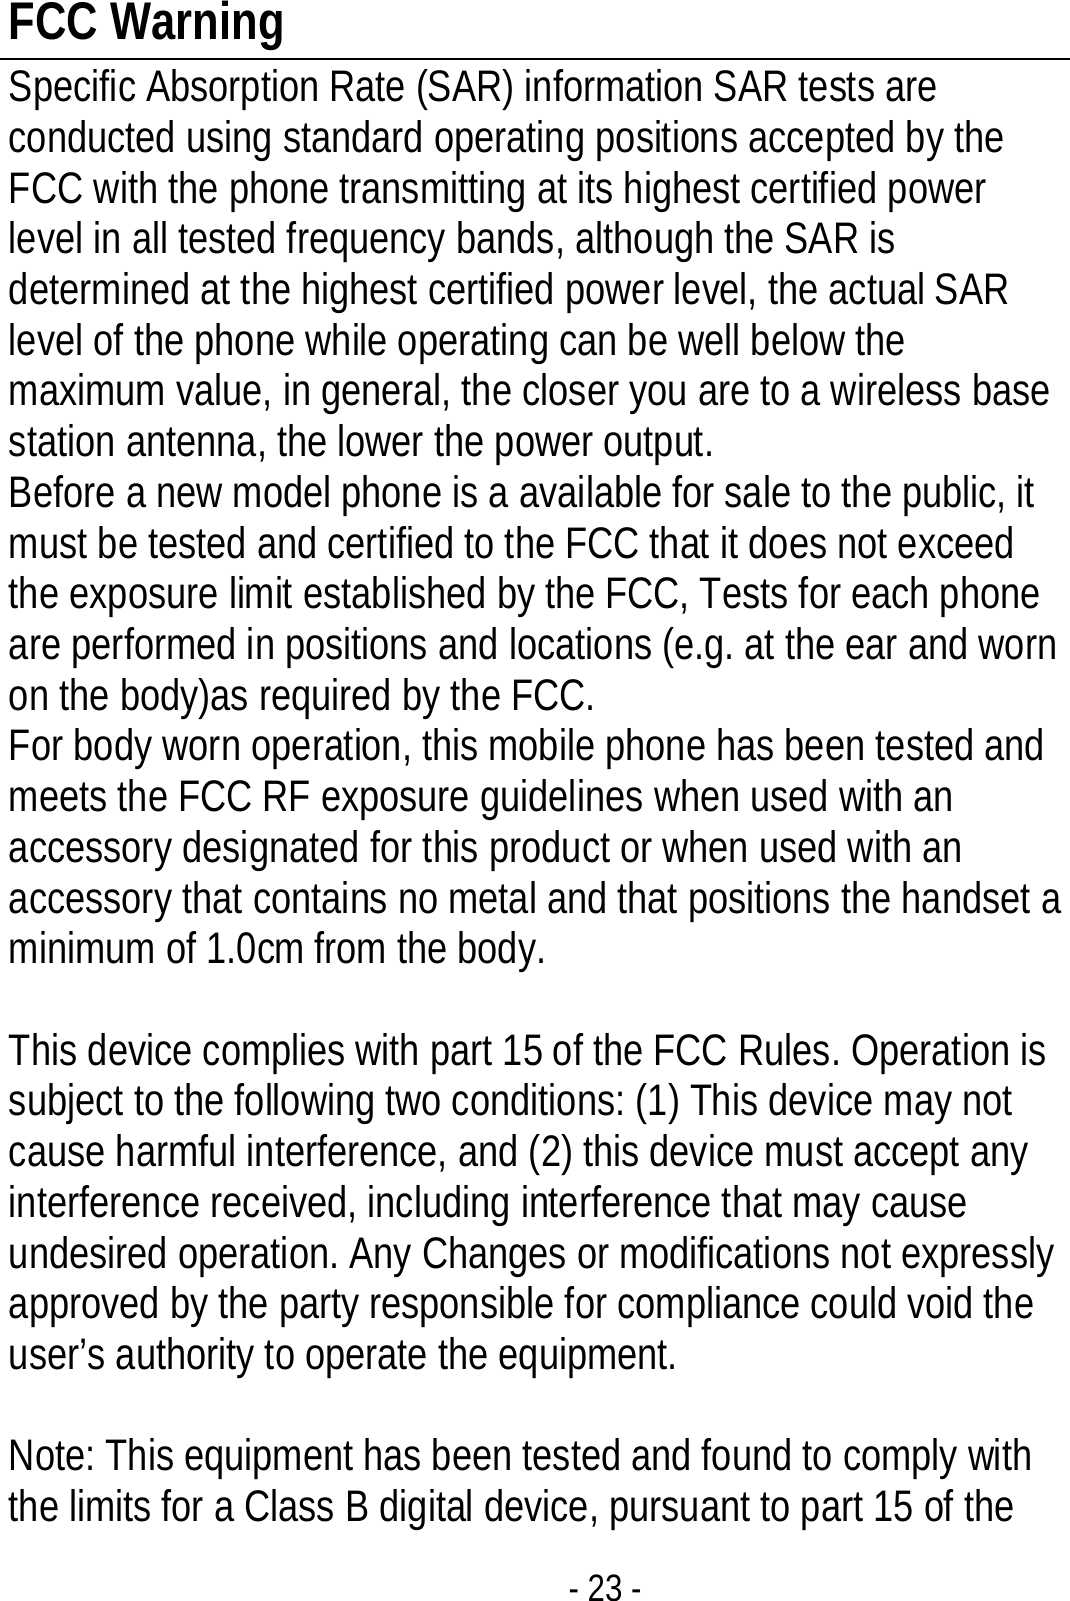 - 23 - FCC Warning Specific Absorption Rate (SAR) information SAR tests are conducted using standard operating positions accepted by the FCC with the phone transmitting at its highest certified power level in all tested frequency bands, although the SAR is determined at the highest certified power level, the actual SAR level of the phone while operating can be well below the maximum value, in general, the closer you are to a wireless base station antenna, the lower the power output. Before a new model phone is a available for sale to the public, it must be tested and certified to the FCC that it does not exceed the exposure limit established by the FCC, Tests for each phone are performed in positions and locations (e.g. at the ear and worn on the body)as required by the FCC. For body worn operation, this mobile phone has been tested and meets the FCC RF exposure guidelines when used with an accessory designated for this product or when used with an accessory that contains no metal and that positions the handset a minimum of 1.0cm from the body.    This device complies with part 15 of the FCC Rules. Operation is subject to the following two conditions: (1) This device may not cause harmful interference, and (2) this device must accept any interference received, including interference that may cause undesired operation. Any Changes or modifications not expressly approved by the party responsible for compliance could void the user’s authority to operate the equipment.       Note: This equipment has been tested and found to comply with the limits for a Class B digital device, pursuant to part 15 of the 